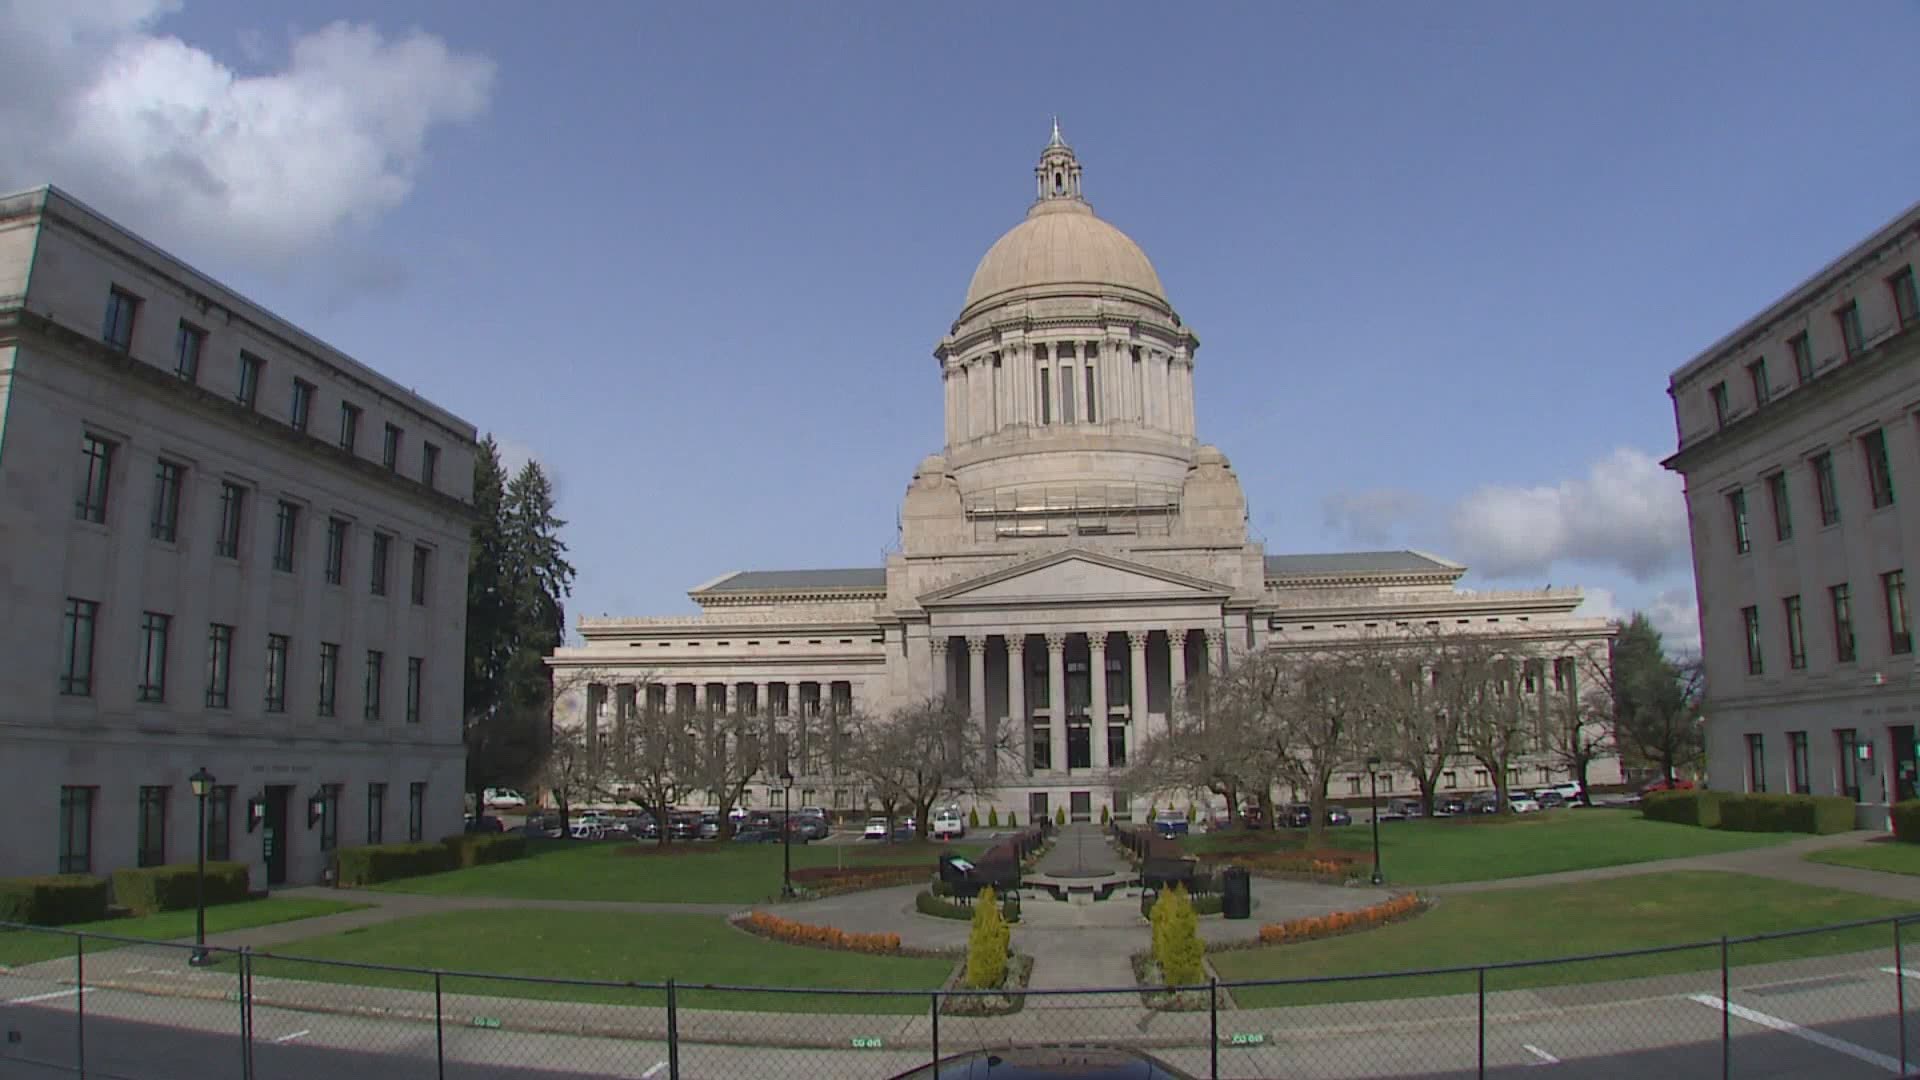 The 2001 Nisqually quake rocked Olympia, damaging the dome of the state Capitol building.